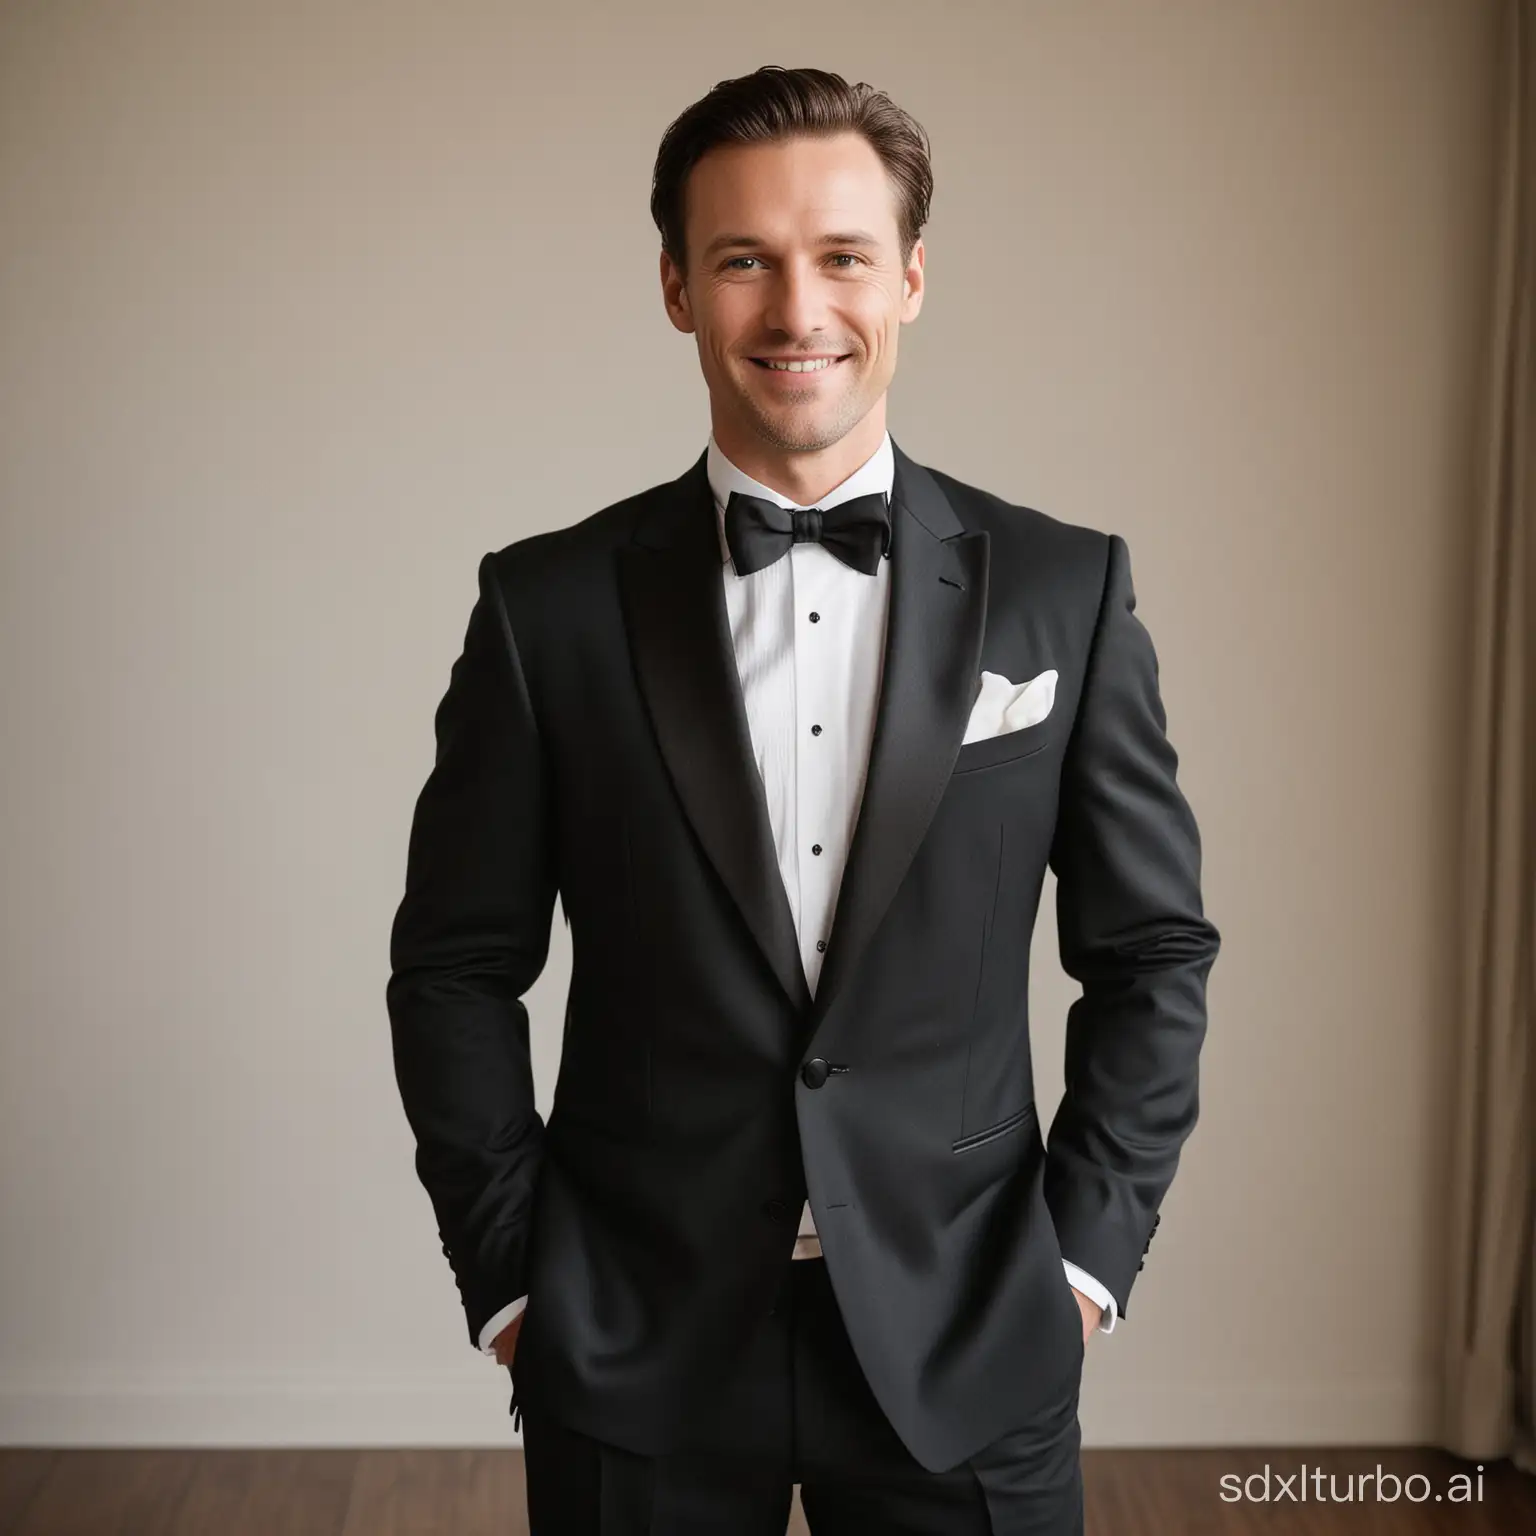 Caucasian male dressed in a sleek tuxedo posing confidently in preparation for his wedding. The man appears to be in his early thirties, with a confident smile and demeanor.